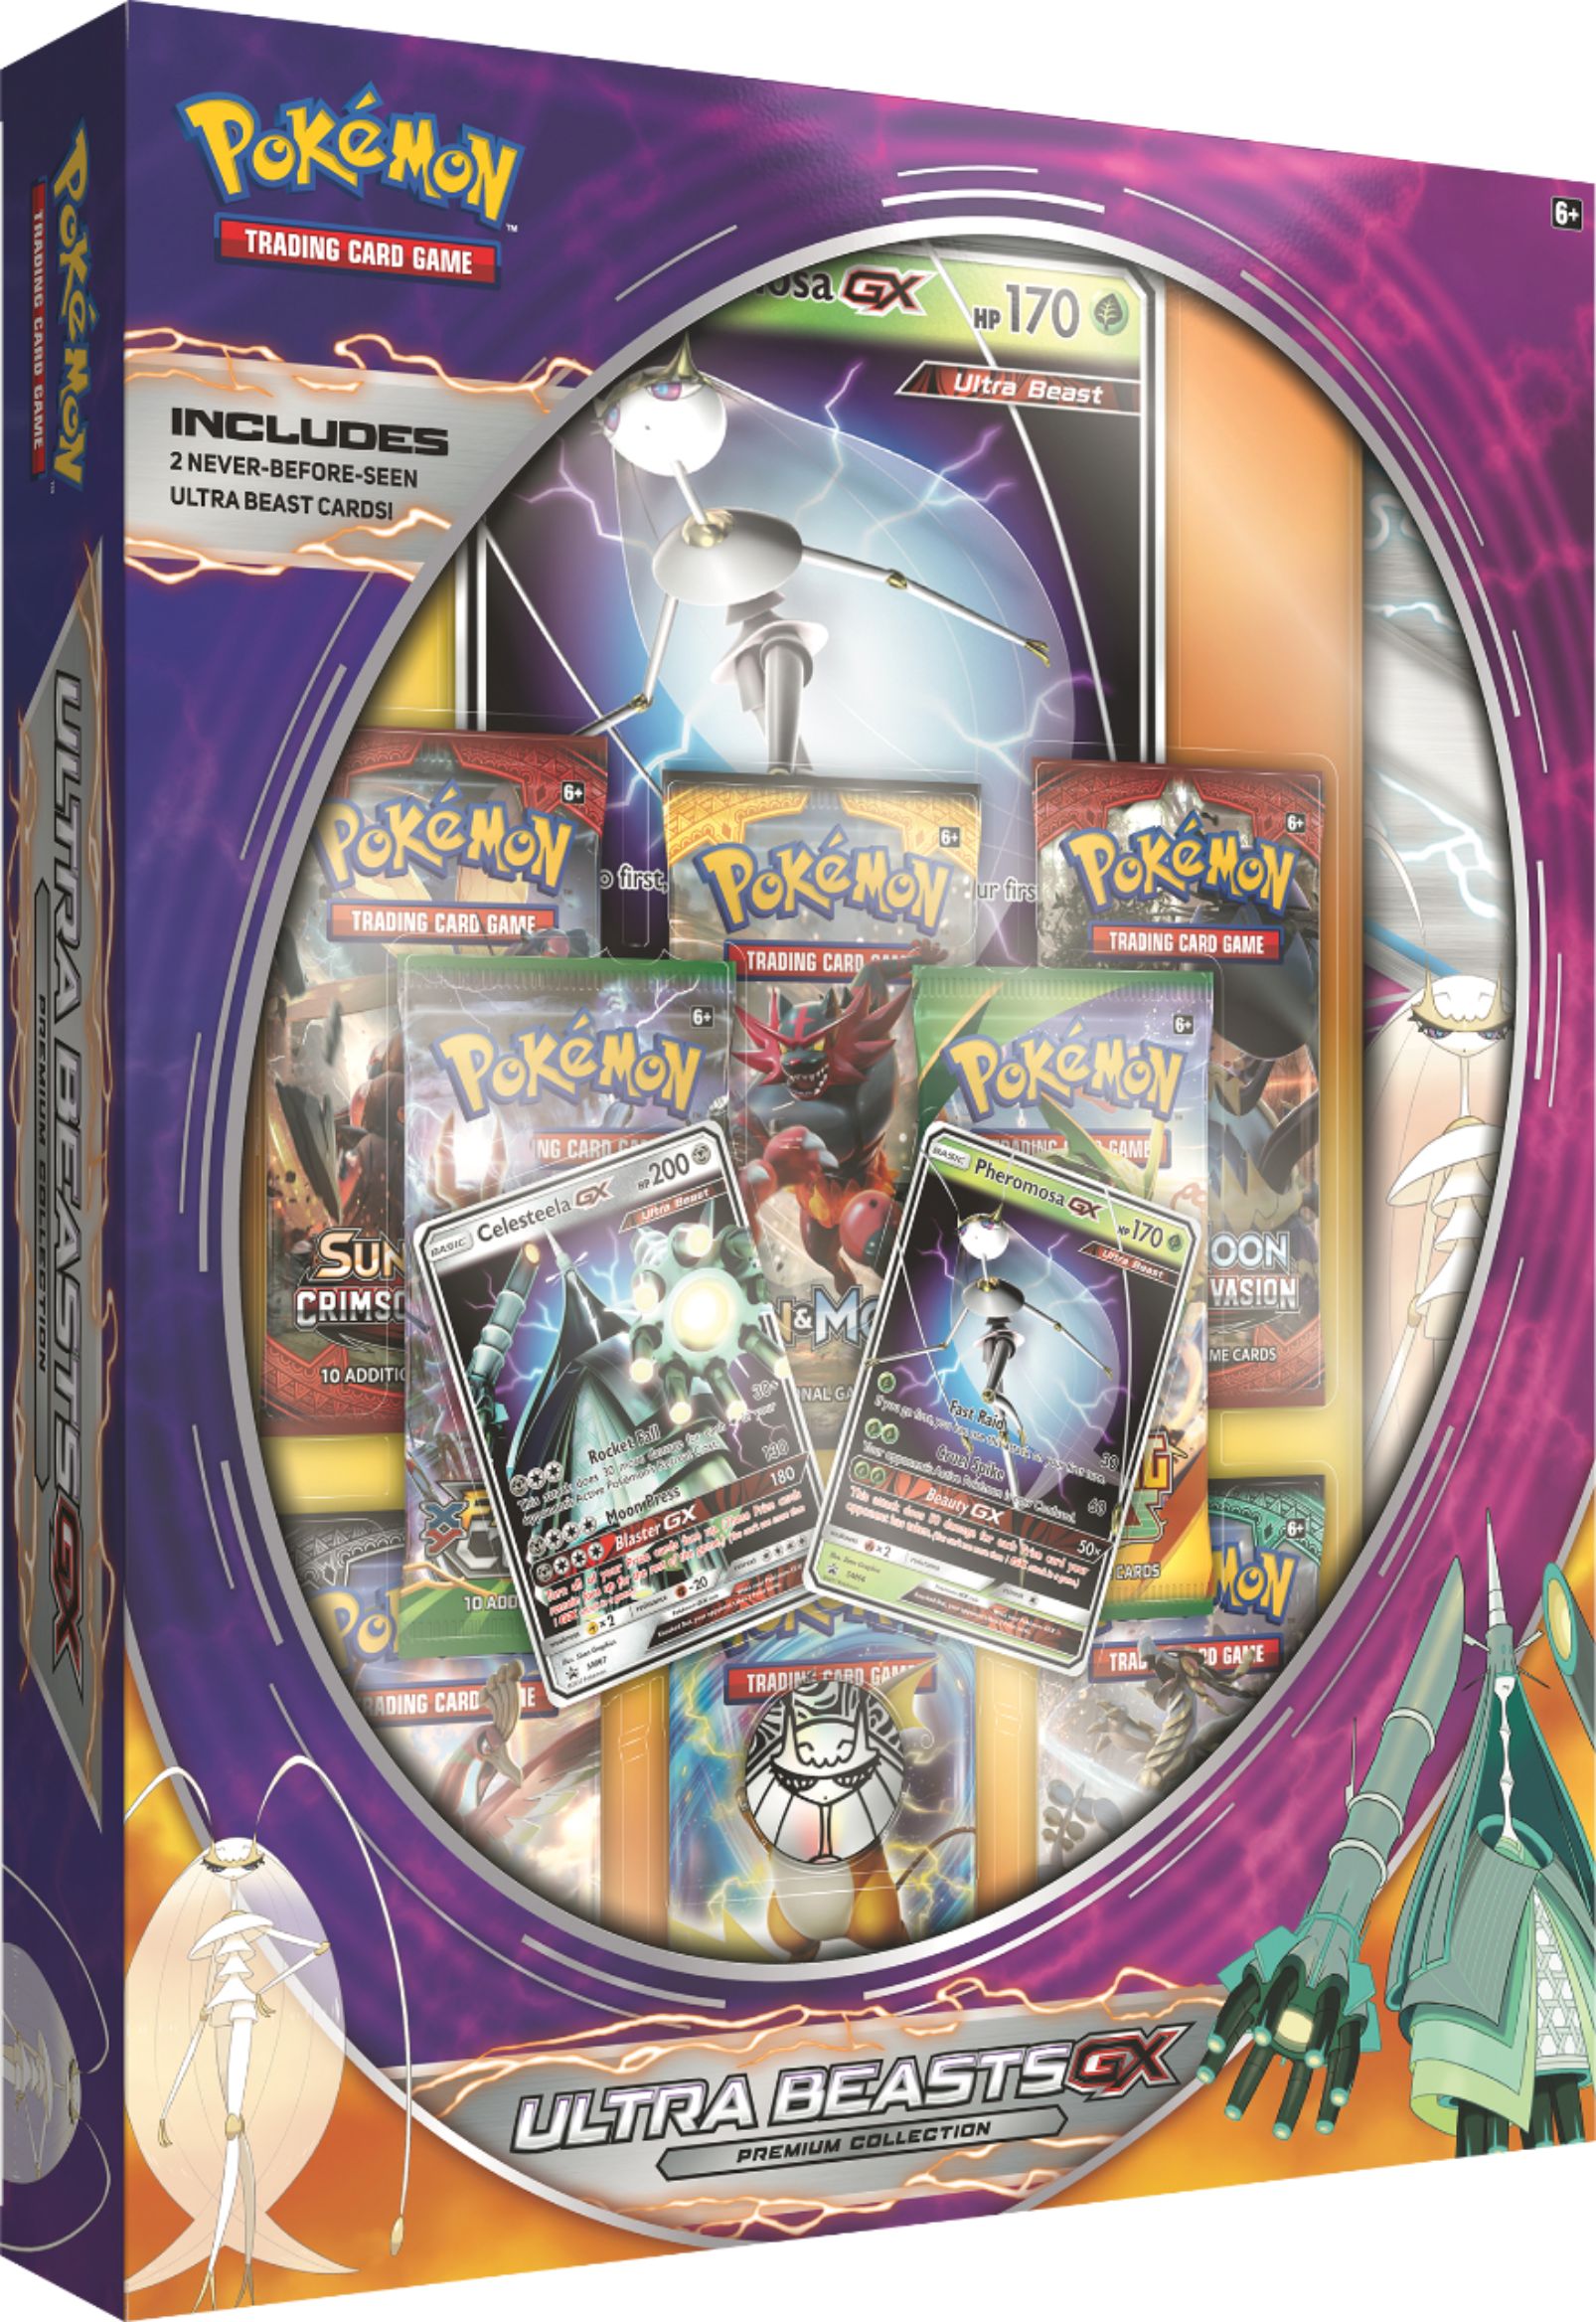 Pokemon Legendary, Mythical and Ultra Beasts Lot for Sale in